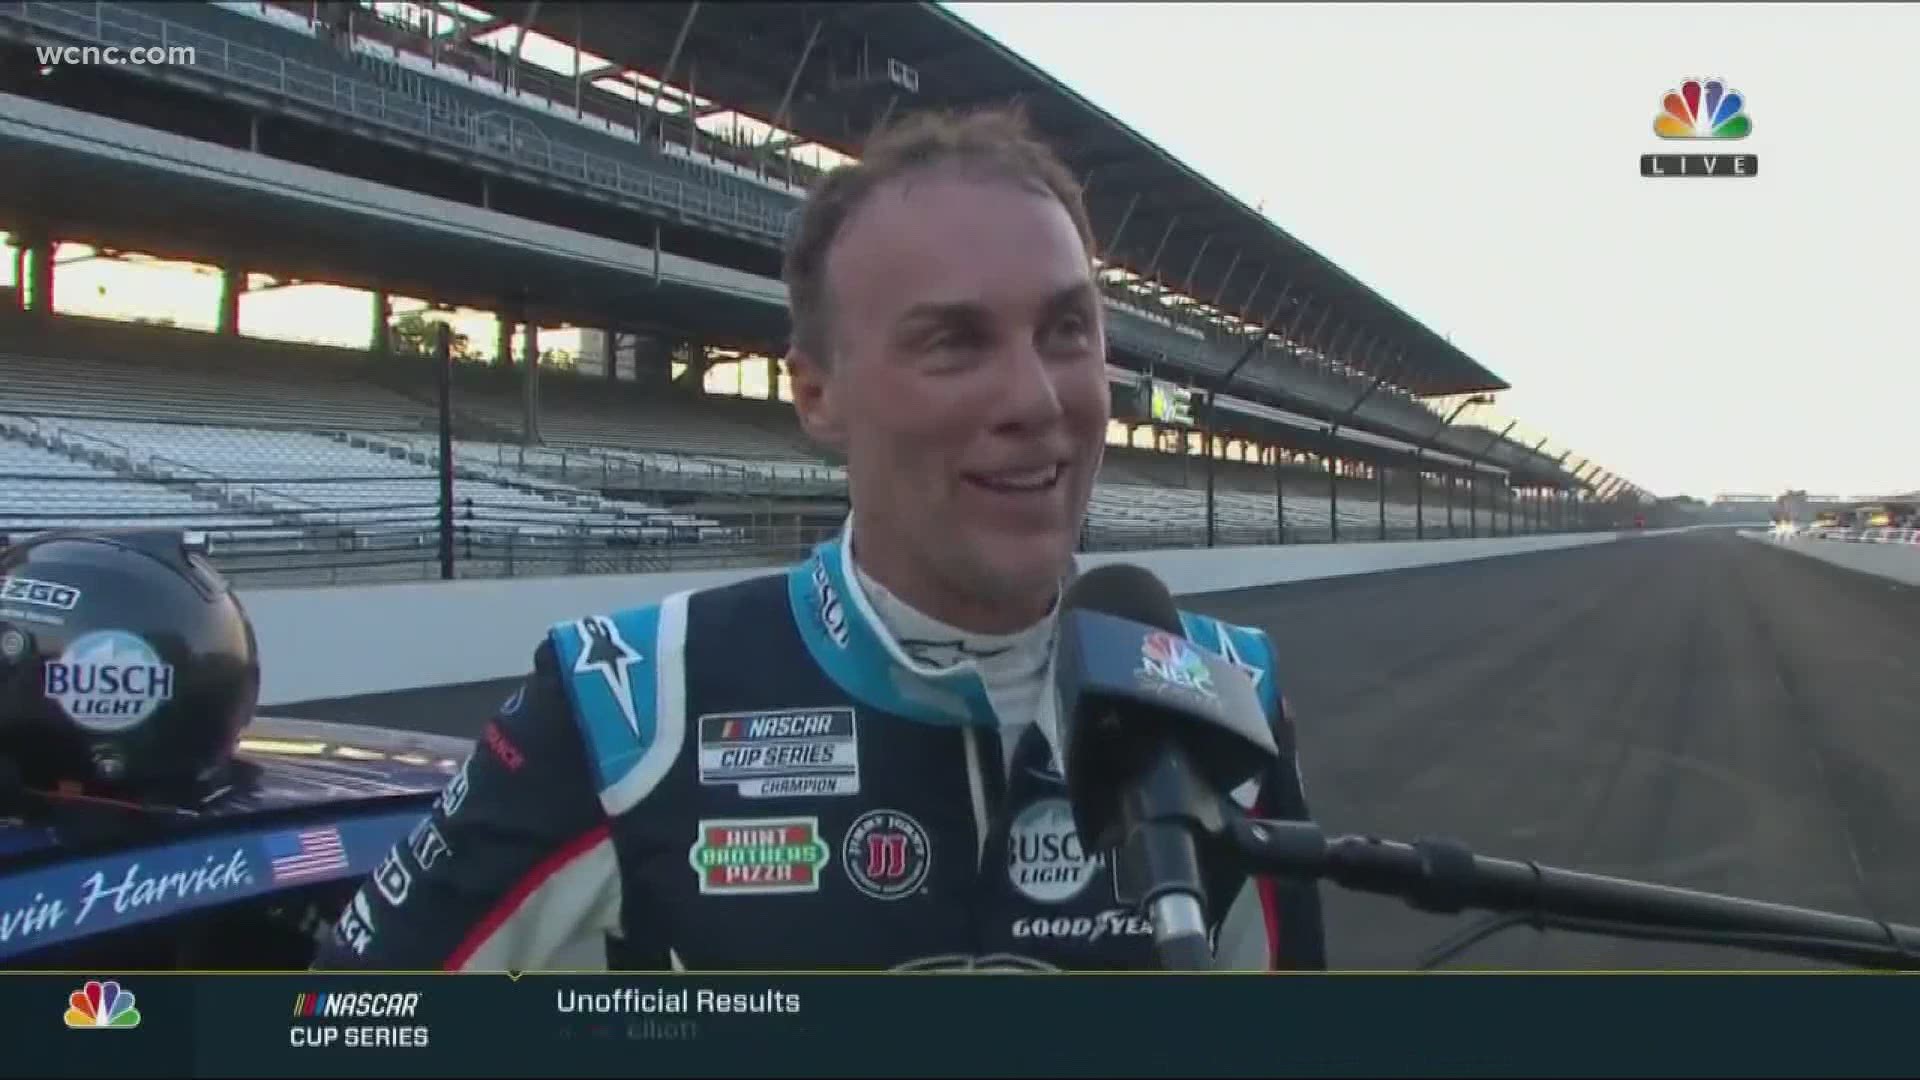 Kevin Harvick turned up the pressure in the Brickyard 400 wcnc